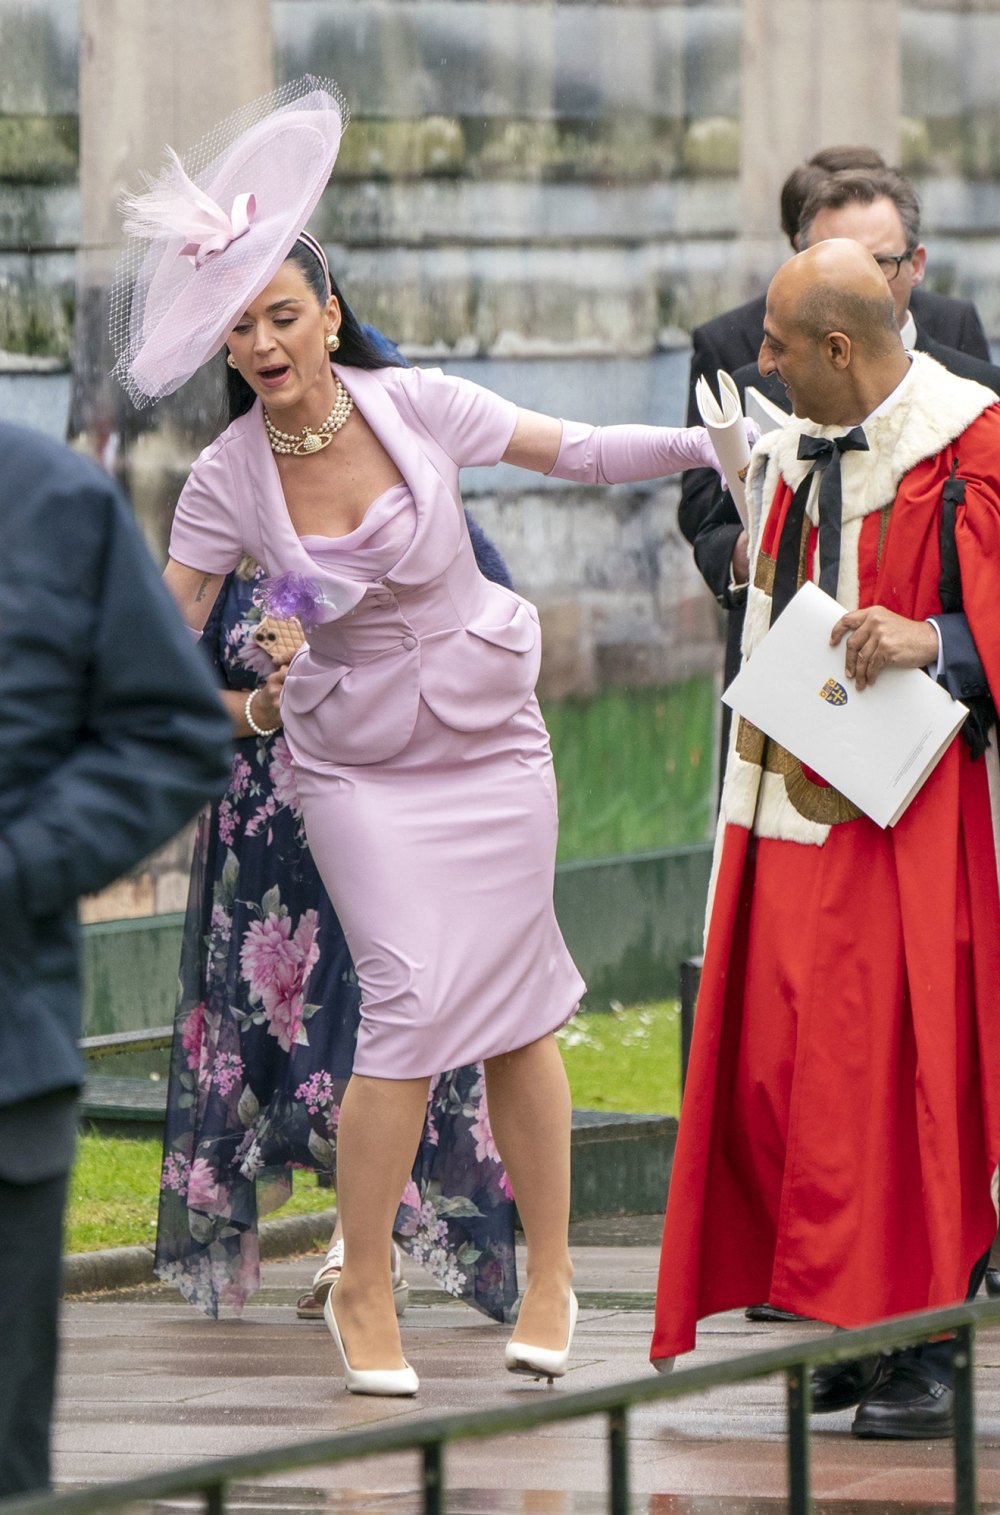 Katy Perry Stumbles While Taking Her Seat at King Charles III's Coronation, Avoids Fall: Photo